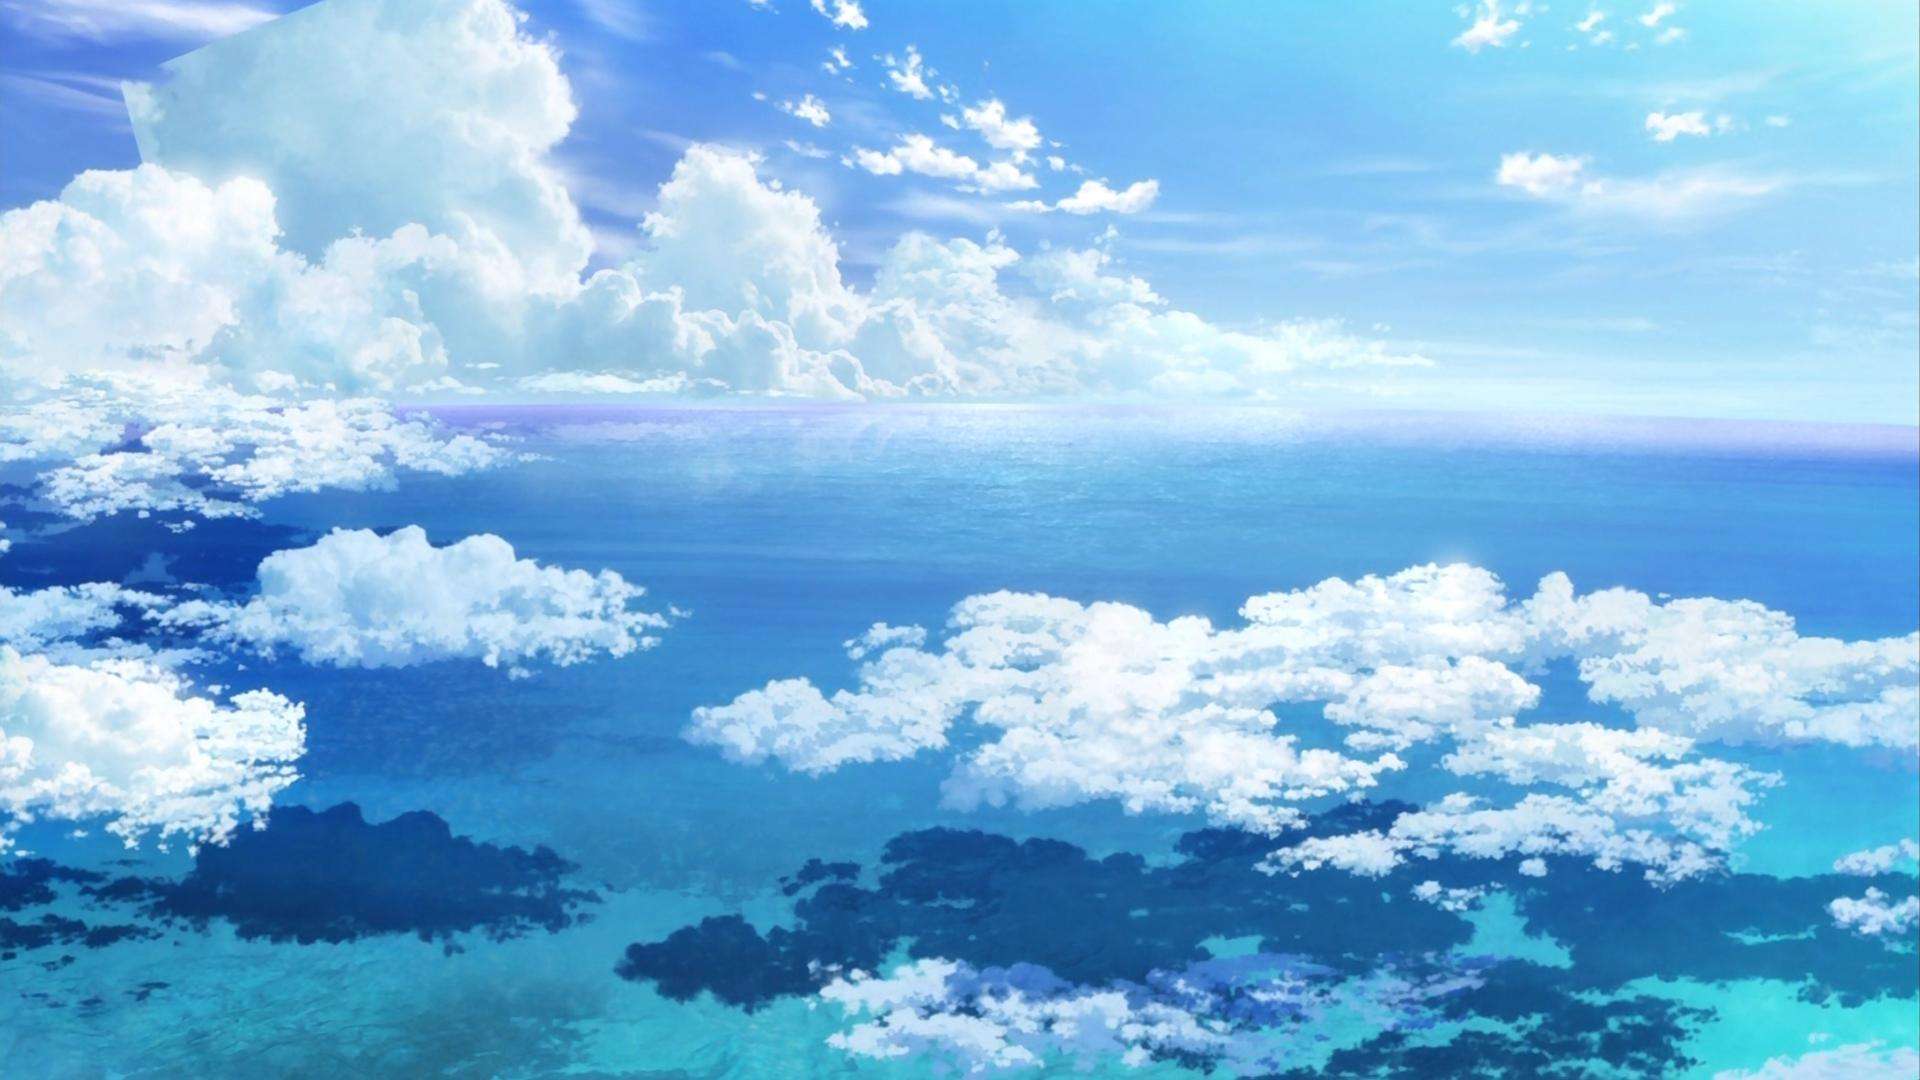 Anime Beautiful Sky Wallpapers Wallpaper Cave